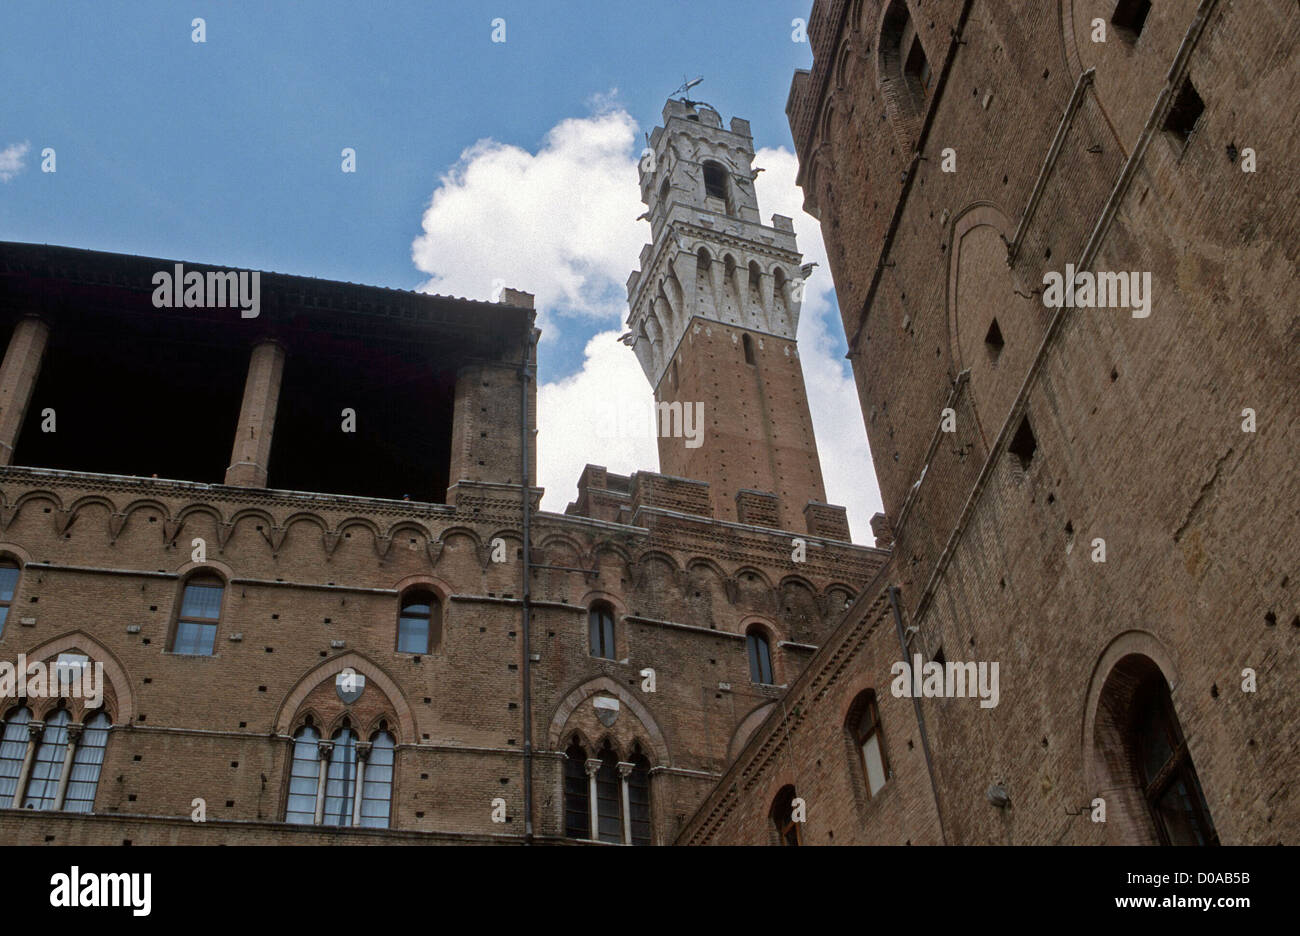 The Torre del Mangia is a tower in Siena, in the Tuscany region of Italy. Stock Photo